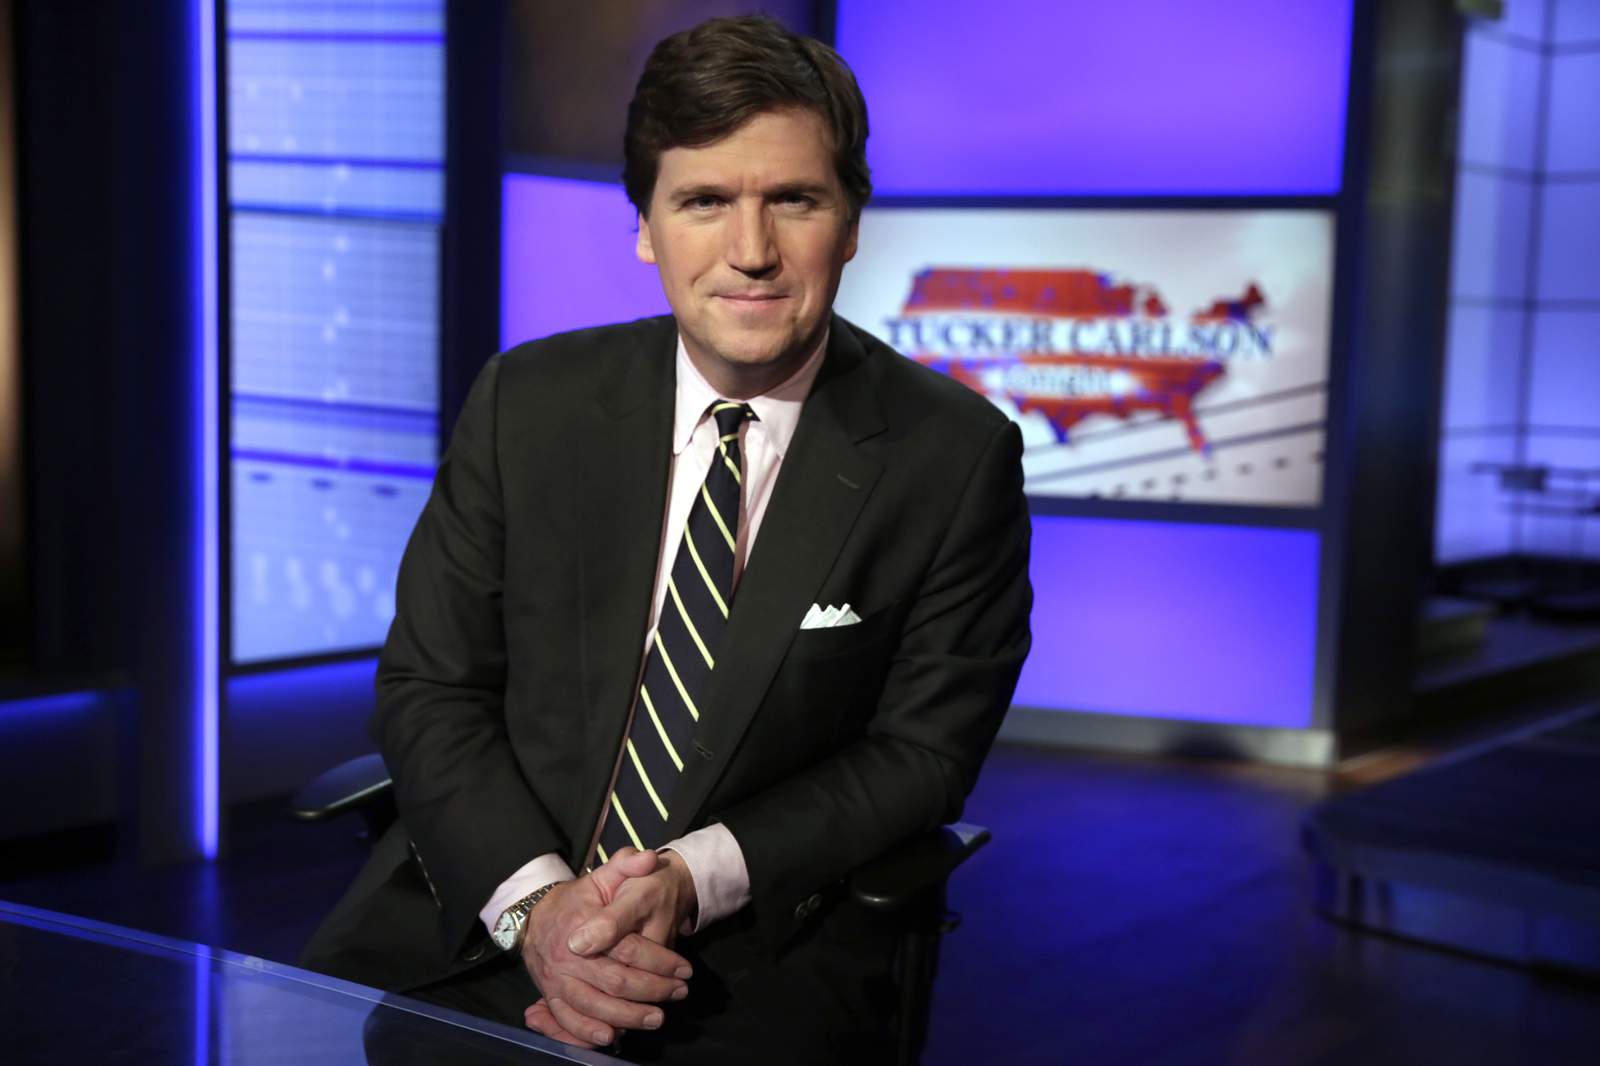 Tucker Carlson battles with The New York Times over privacy